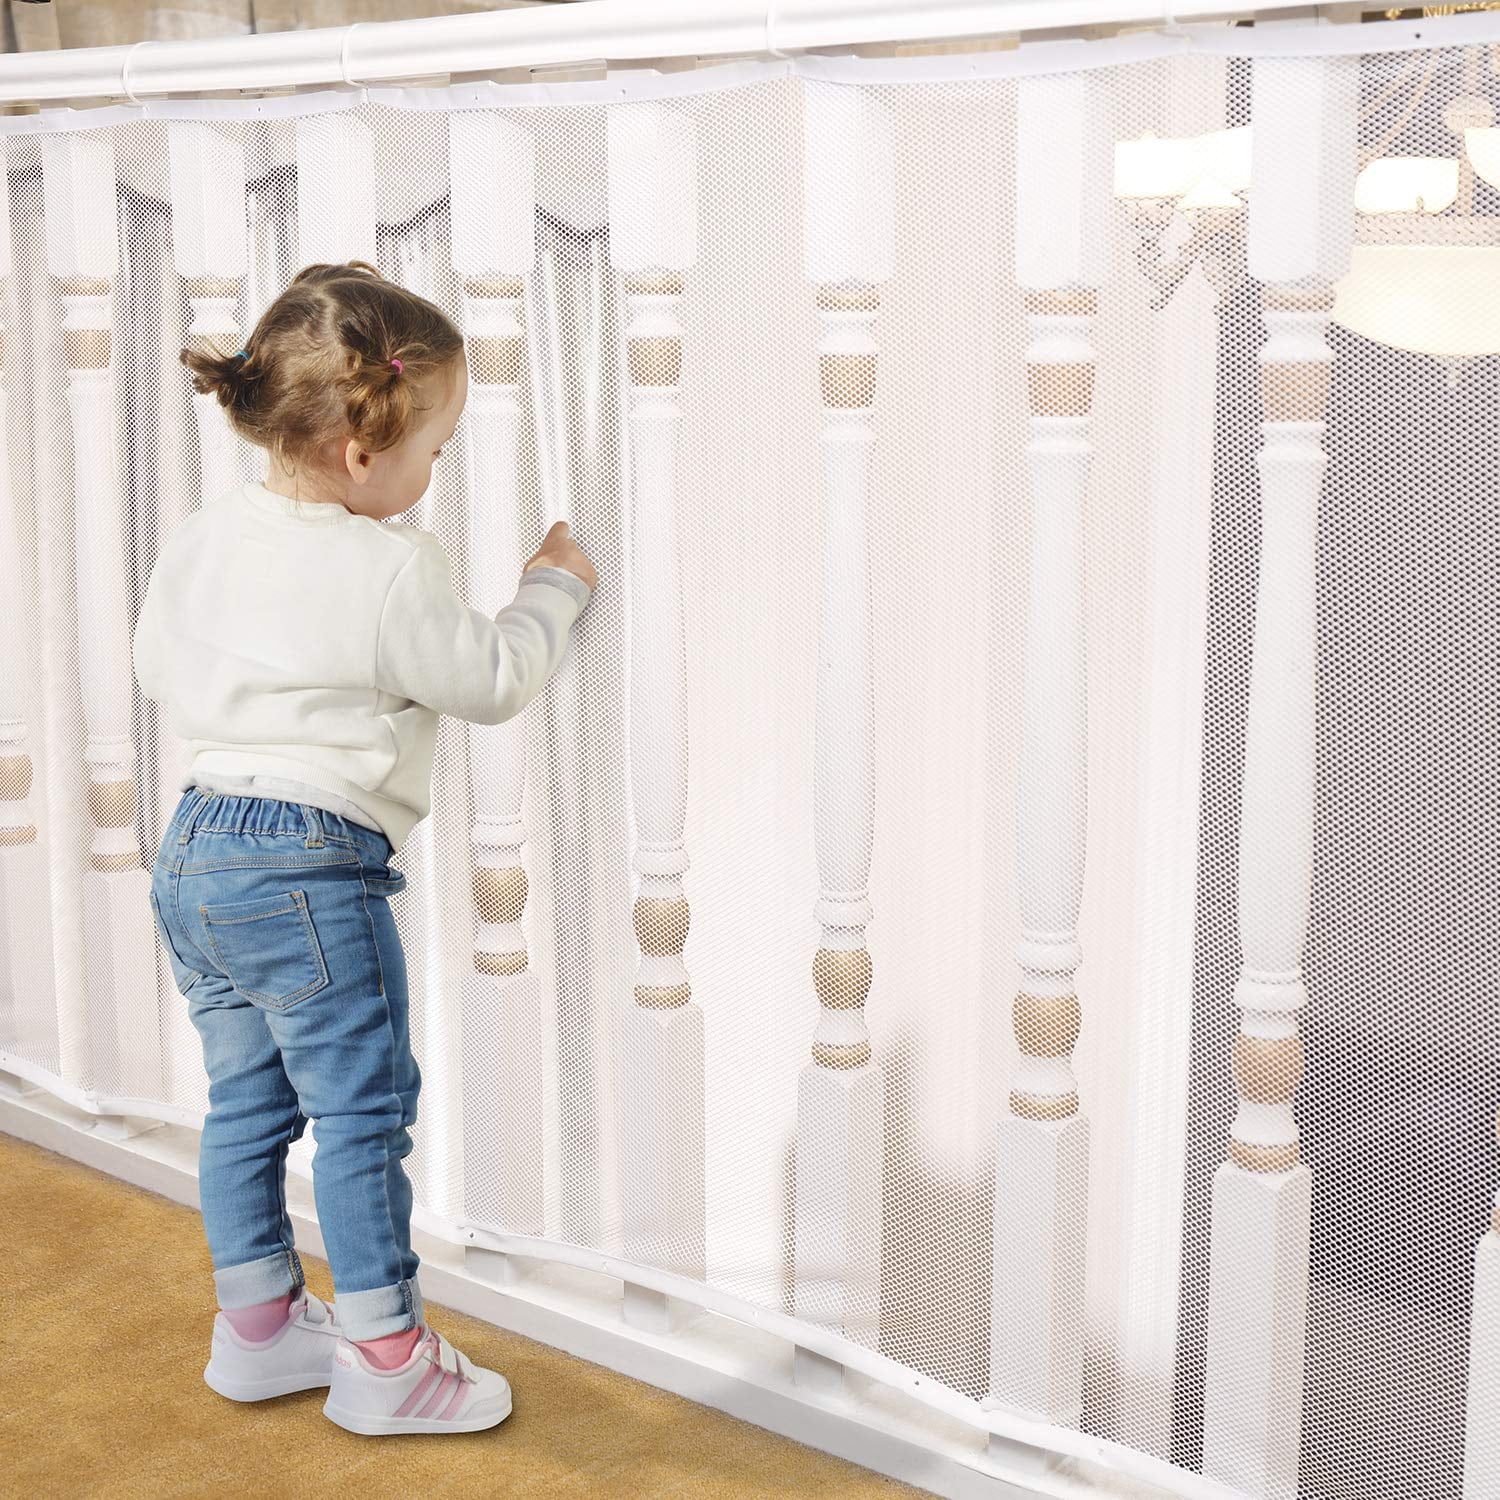 10ft x 3ft Pets Stair Railing Proof Mesh for Kids Toys Banister Guard for Baby Child Safety Net White 